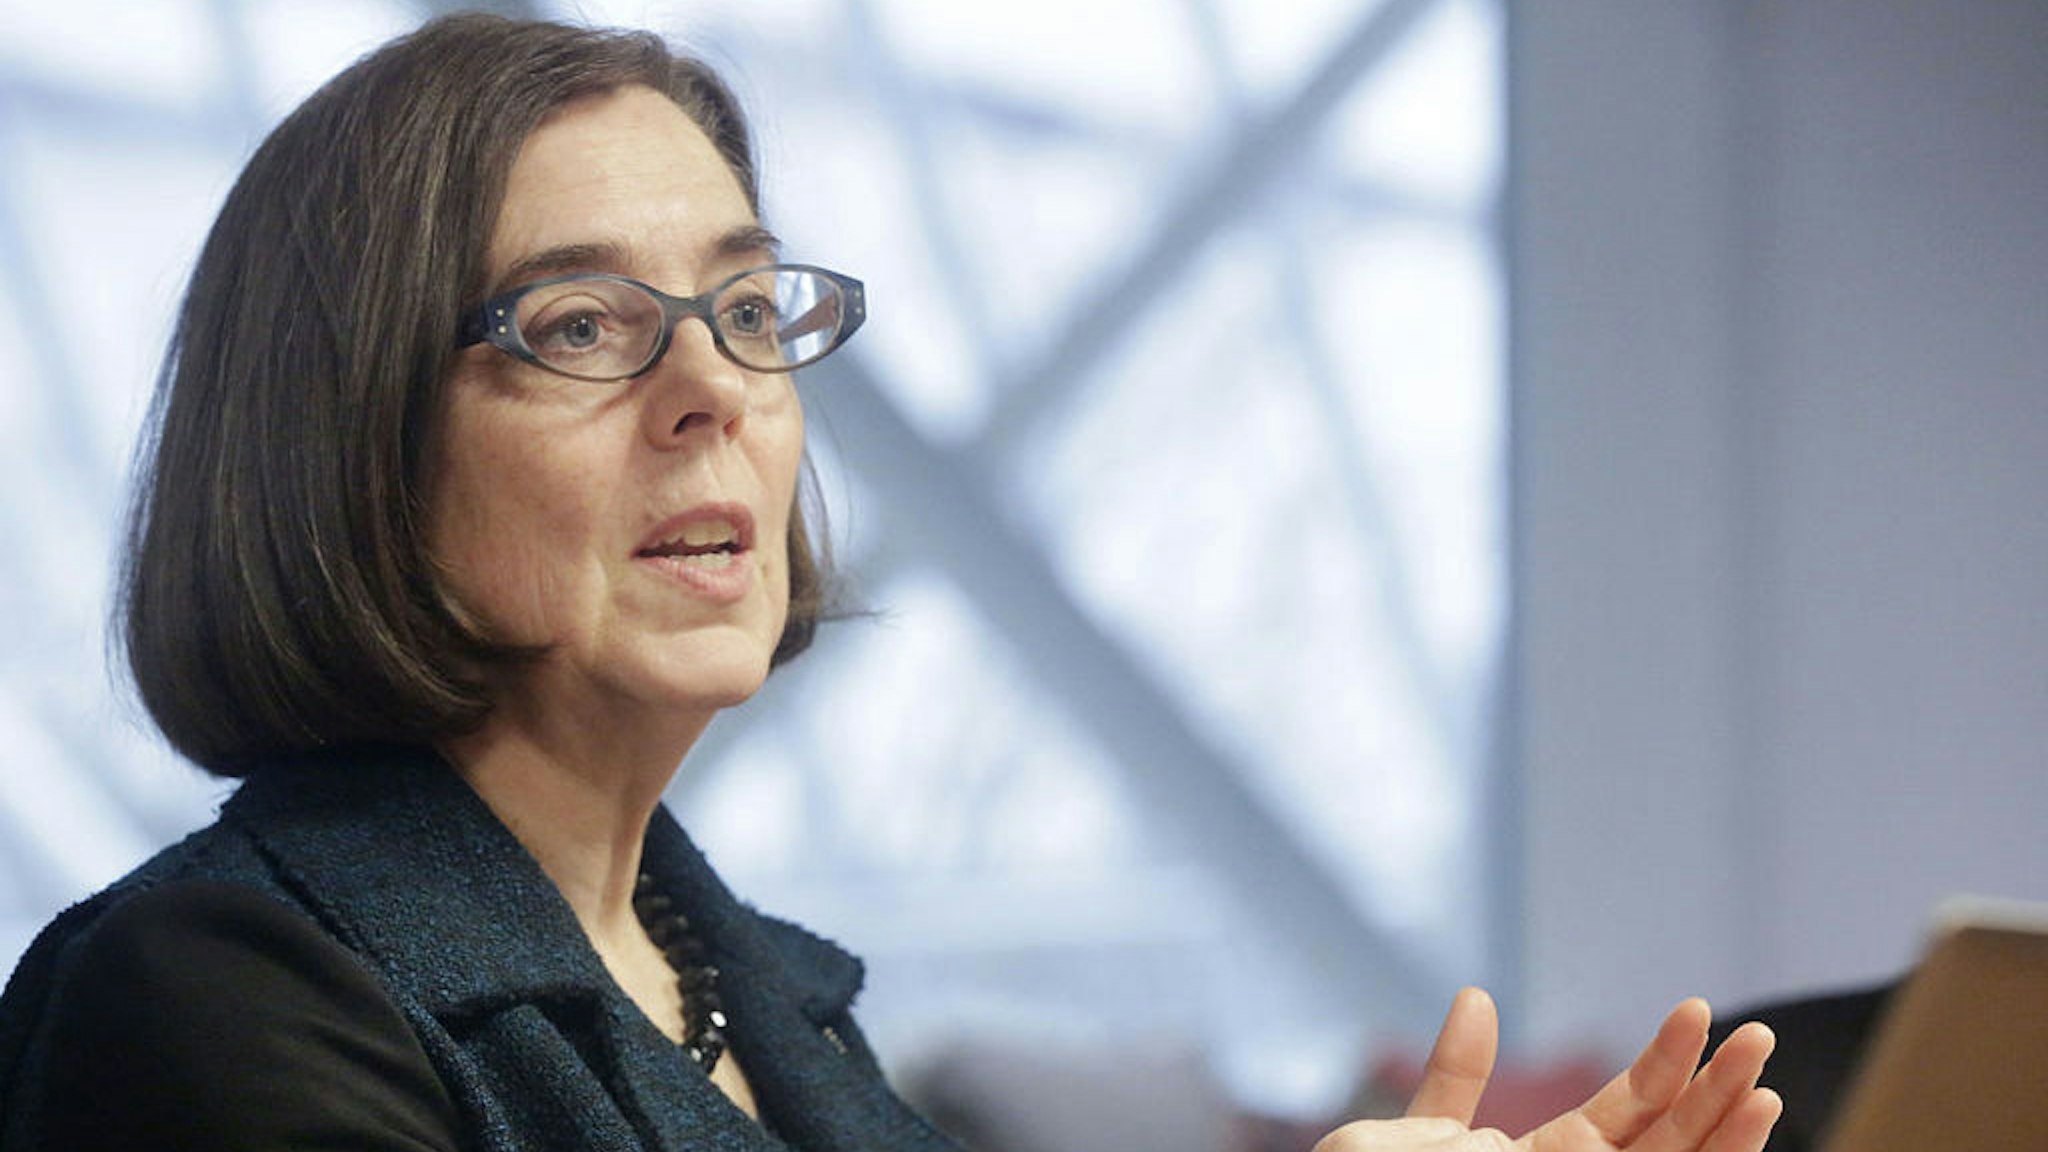 Kate Brown, governor of Oregon, speaks during an interview in Portland, Oregon, U.S. on Wednesday, Jan. 20, 2016. Brown, a Democrat, joined the state House of Representatives in 1991, was later elected to the Senate and served as secretary of state since 2009, before taking over as governor in February. Photographer: Meg Roussos/Bloomberg via Getty Images